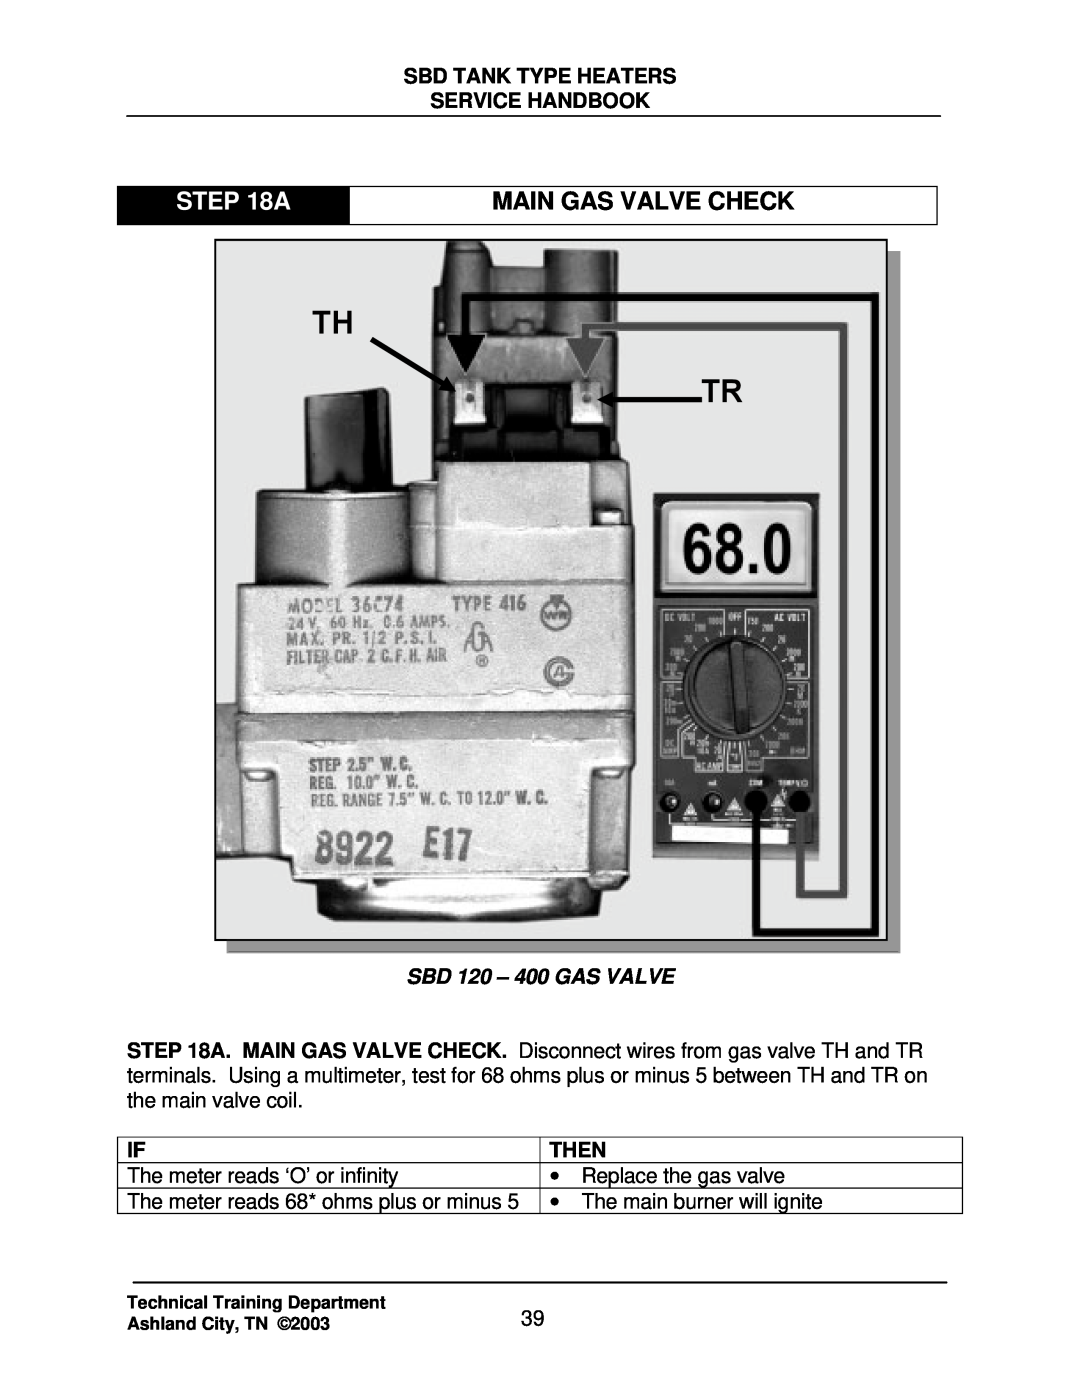 State Industries SBD85 500, SBD71 120 manual A, Main Gas Valve Check, Th Tr, Sbd Tank Type Heaters Service Handbook, Then 